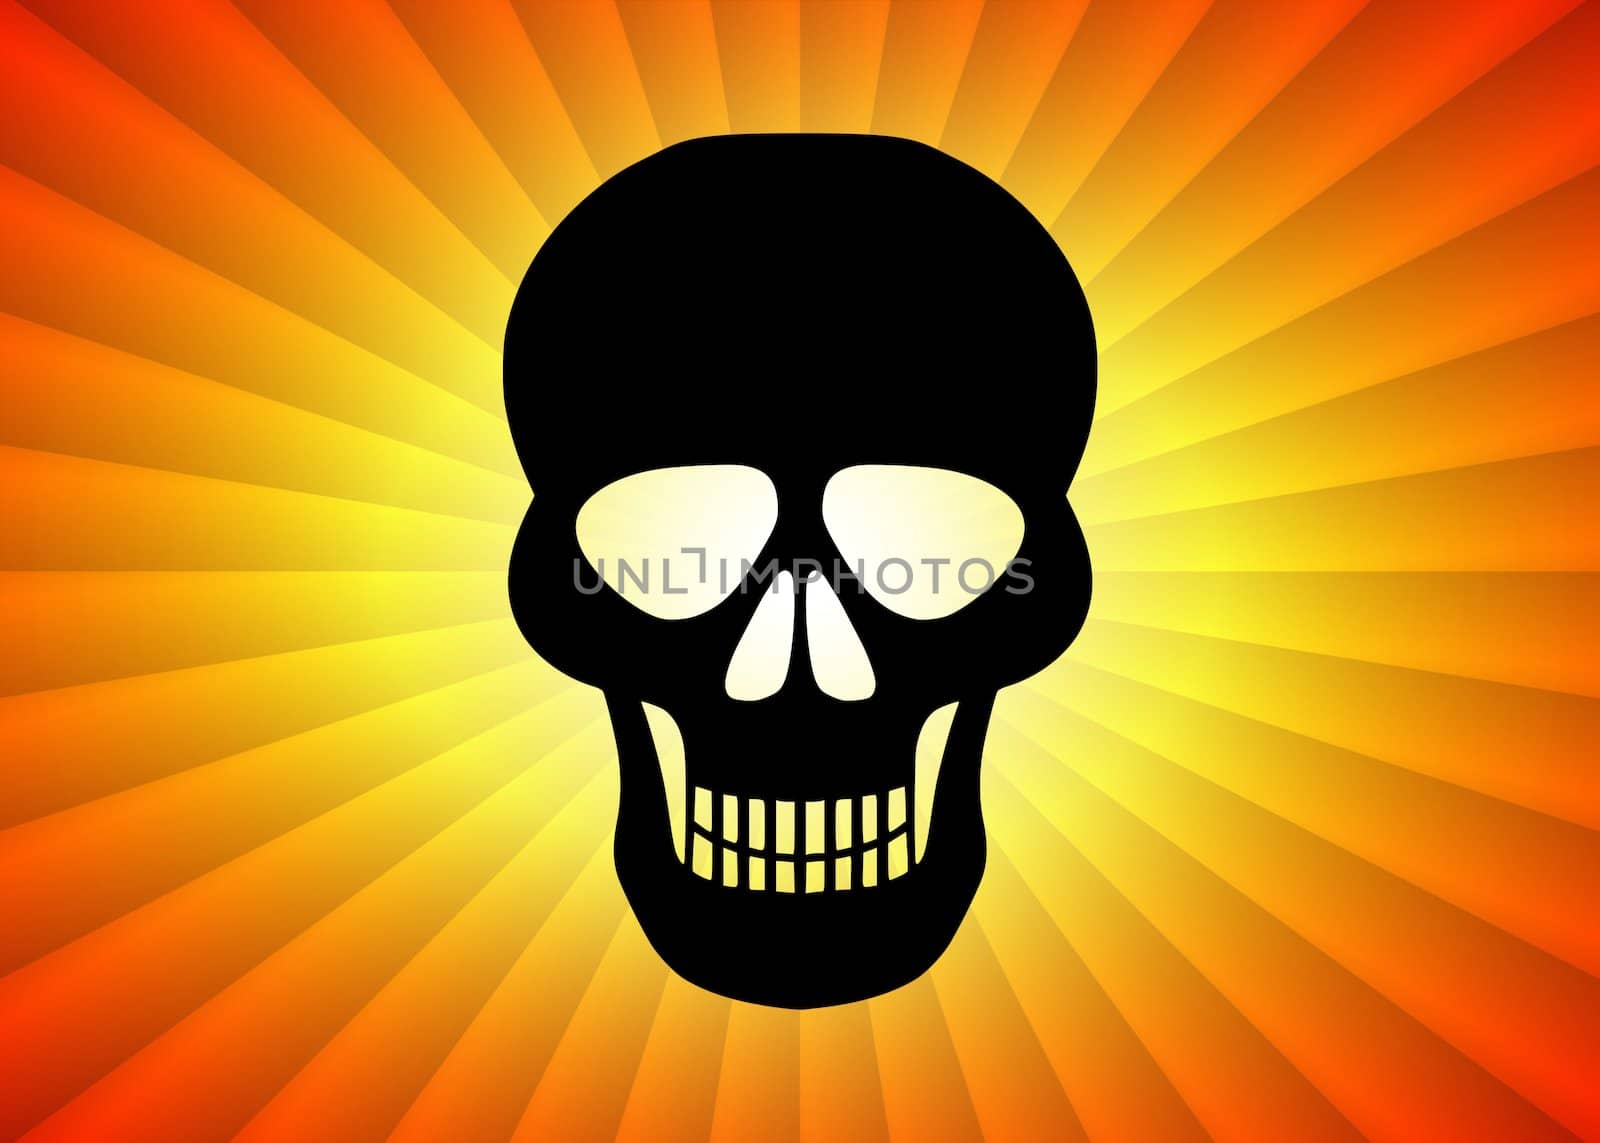 Illustration of a black skull against an orange and yellow background